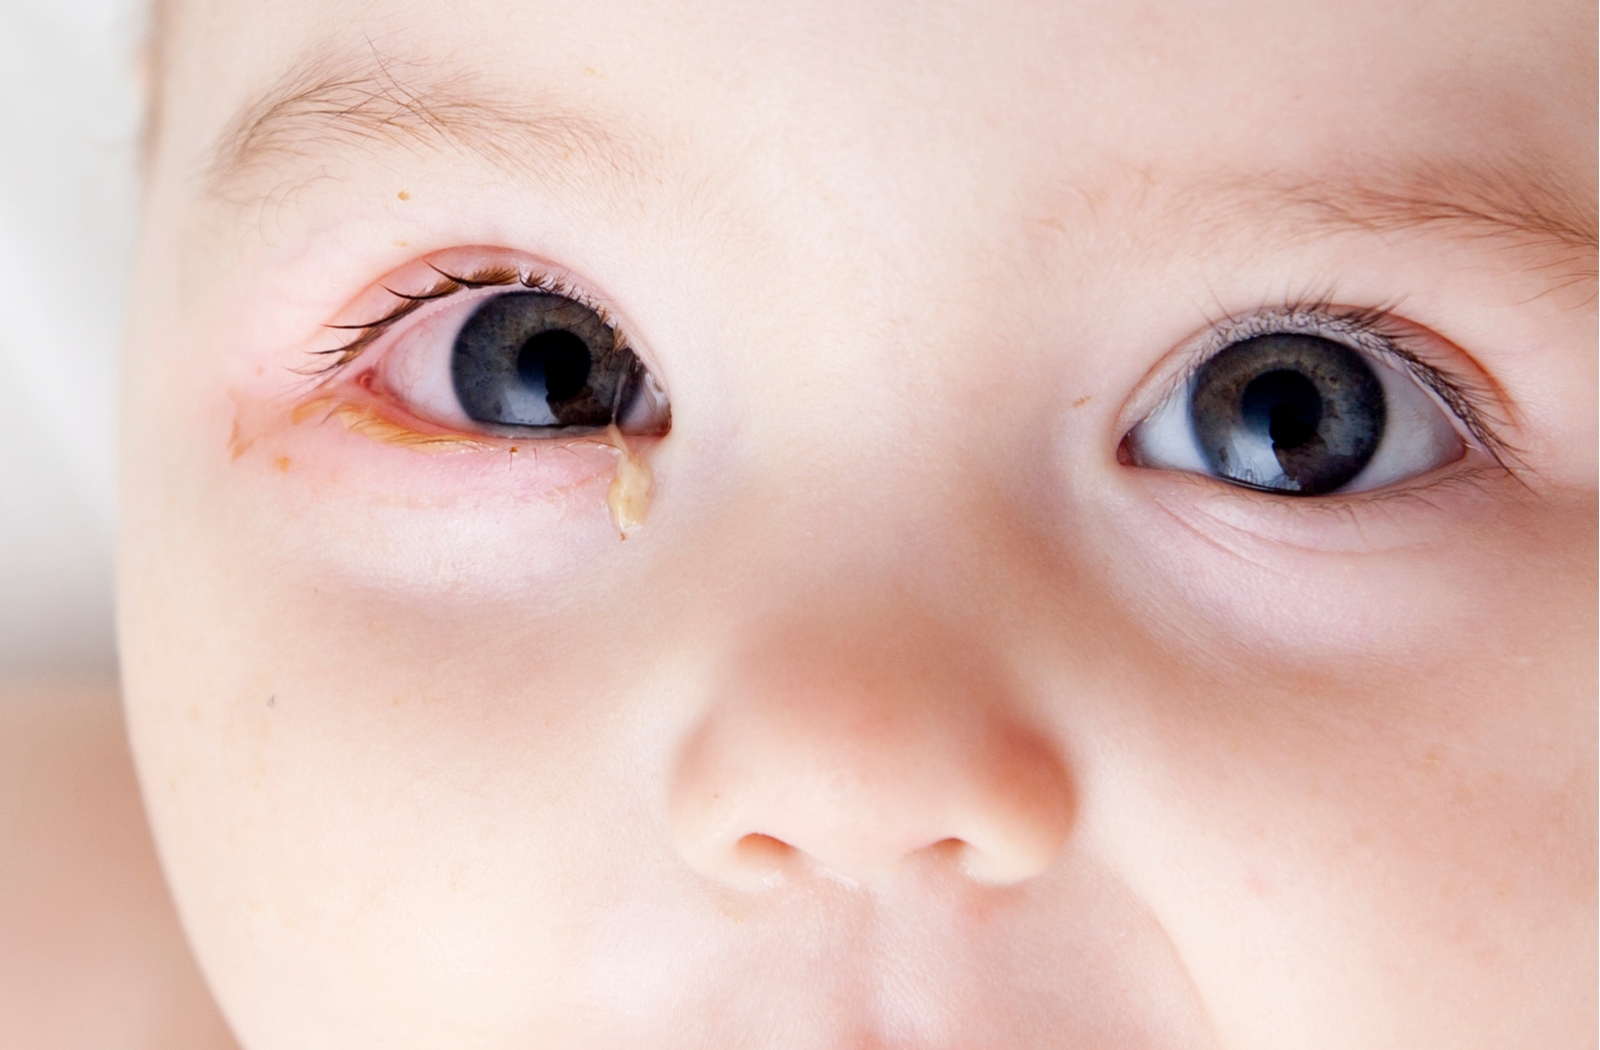 A close up of a baby with pink eye in their right eye